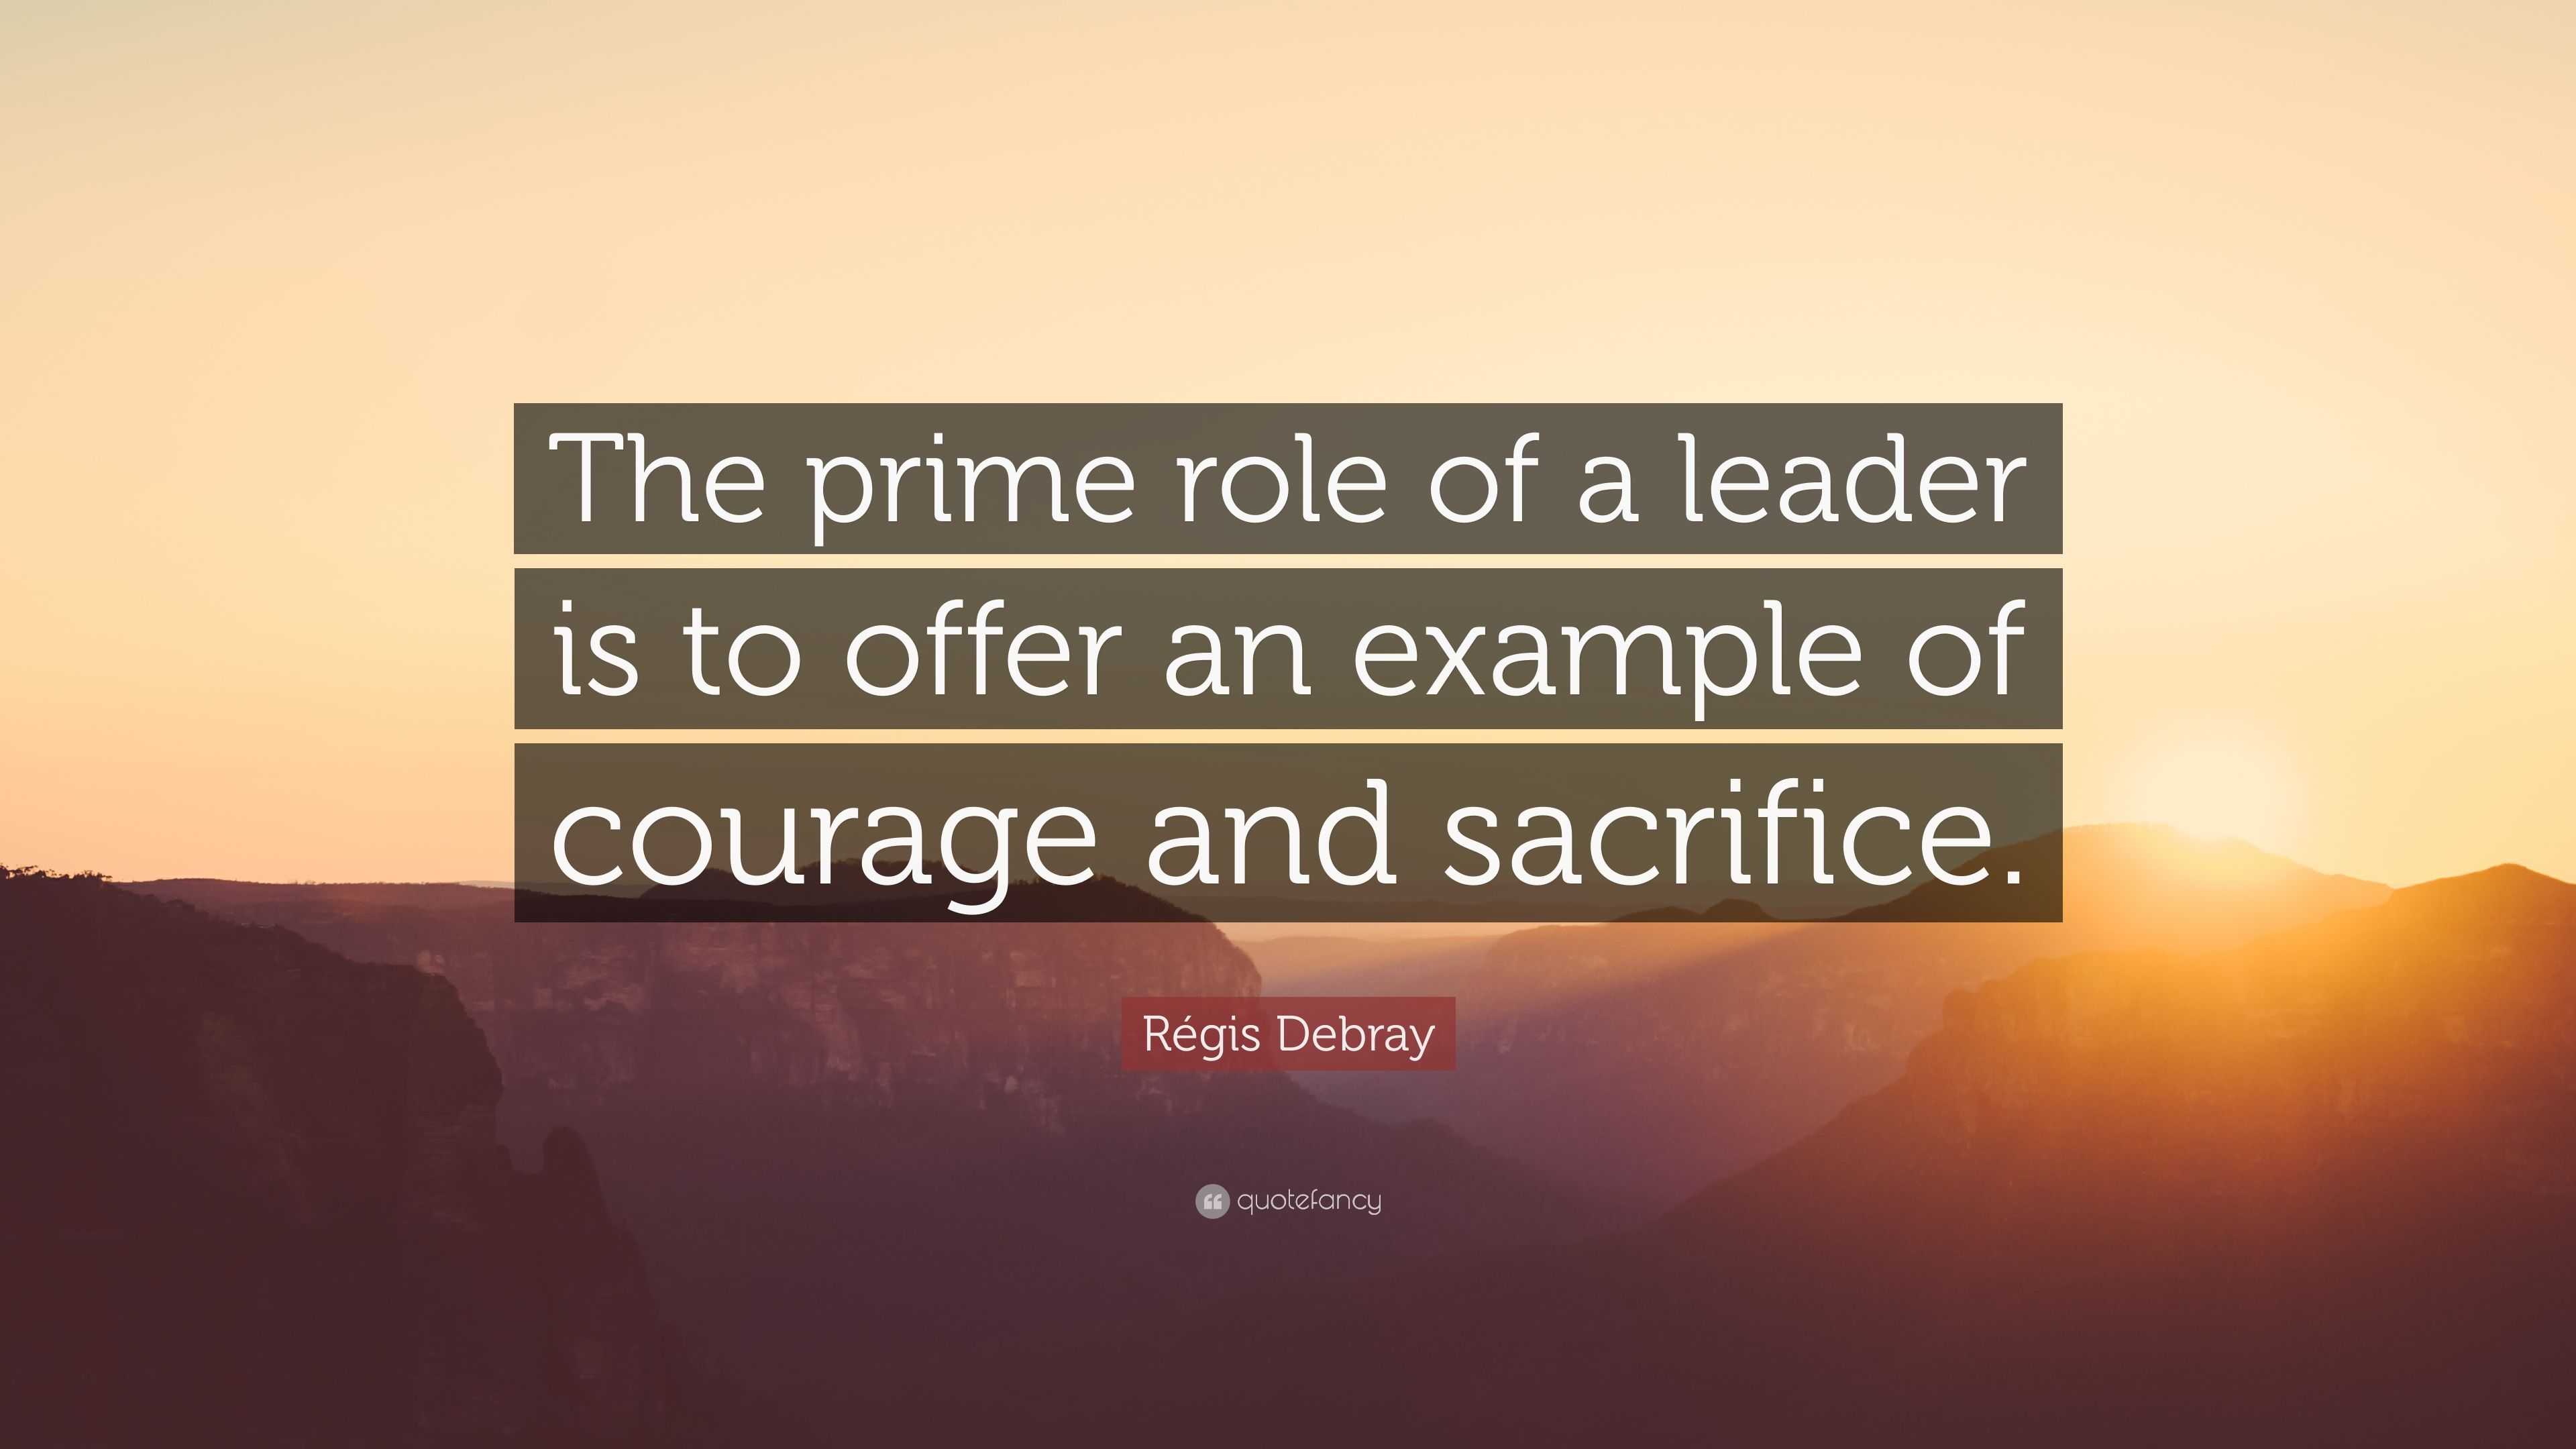 https://quotefancy.com/media/wallpaper/3840x2160/5462963-R-gis-Debray-Quote-The-prime-role-of-a-leader-is-to-offer-an.jpg